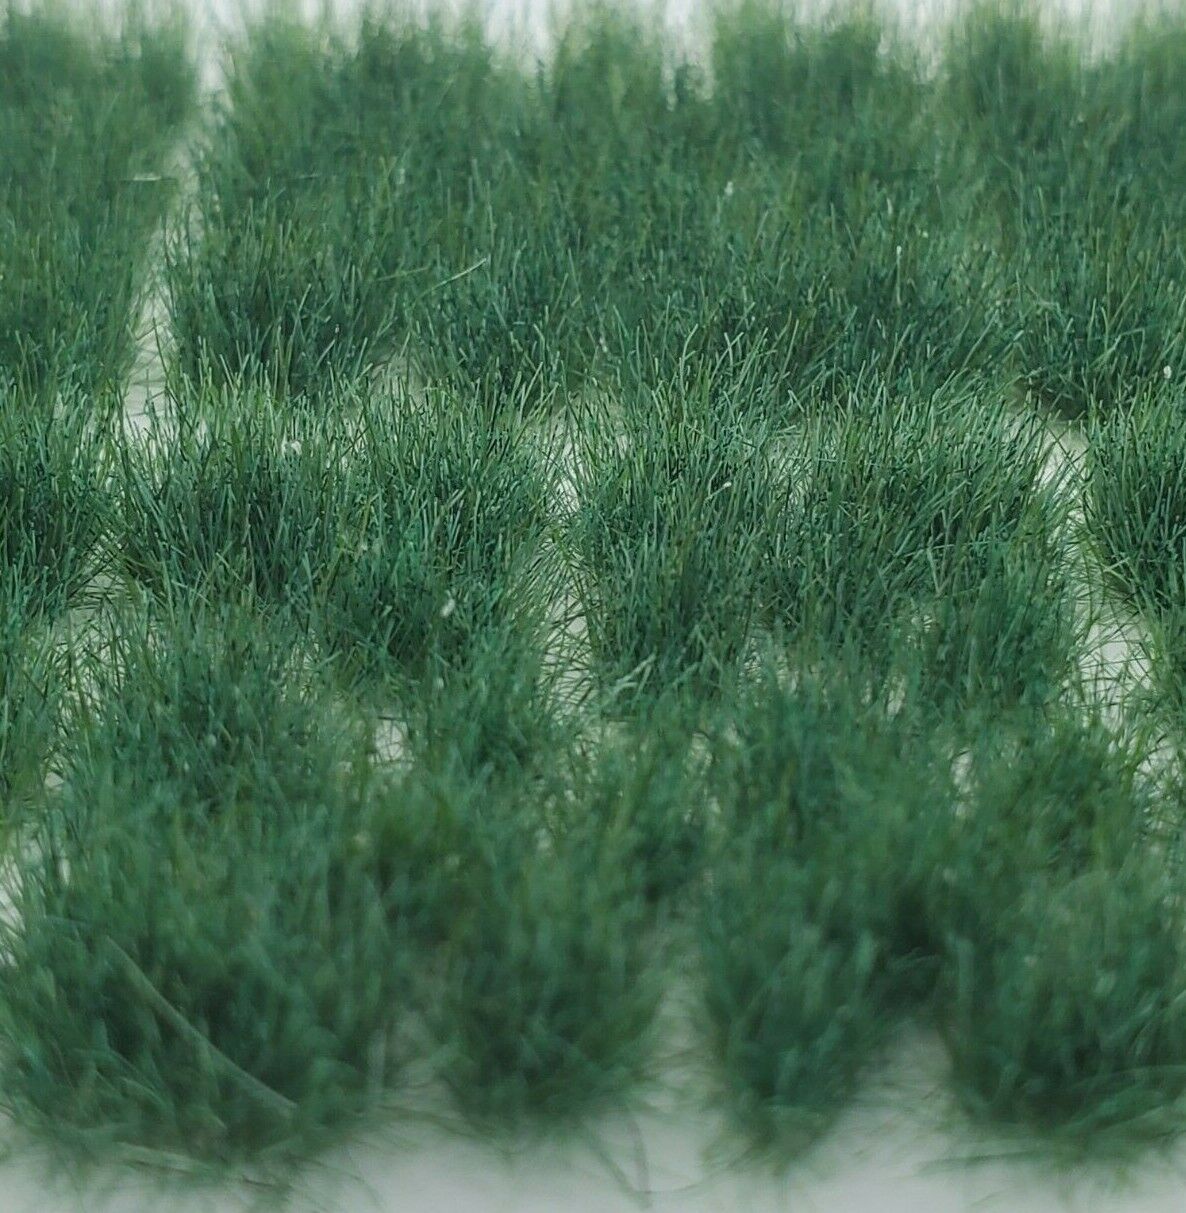 Self Adhesive Static Grass Tufts For Miniature Scenery -plain Green- 8mm